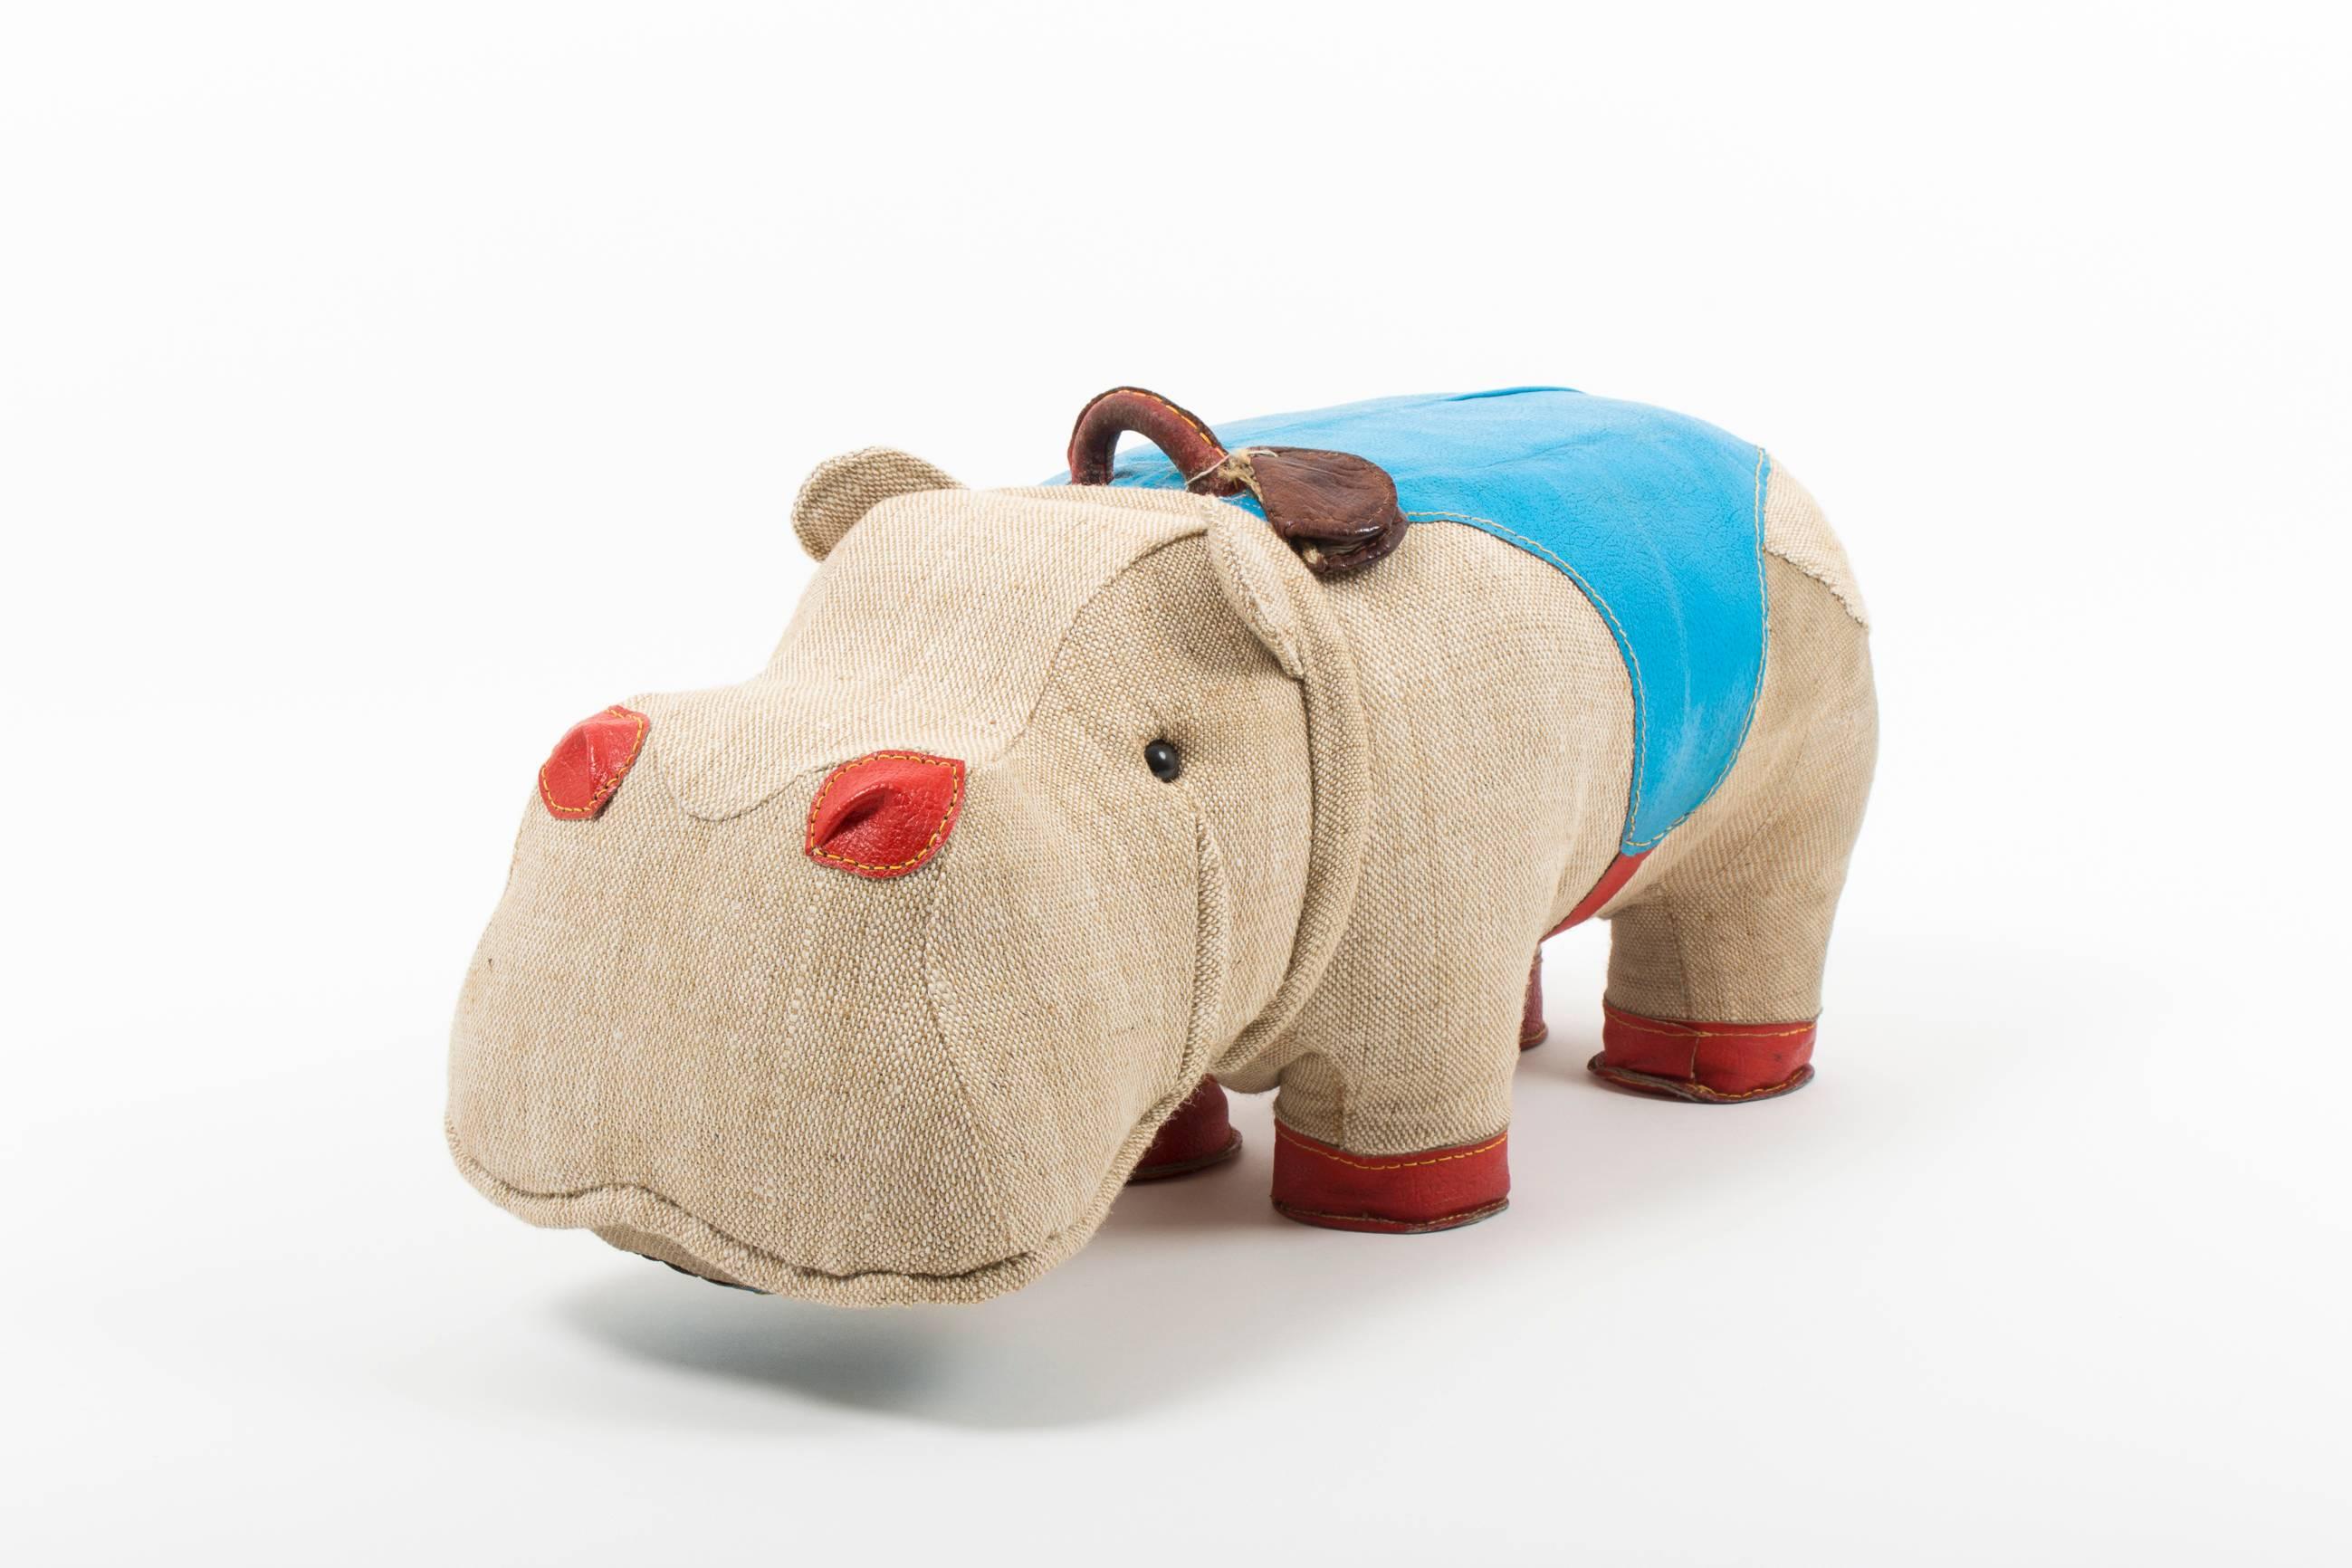 Another of the iconic therapeutic toy animals by the East German designer Renate Müller. The typical use of jute and colored leather make these animals age quite characteristically. The presented animal was restored by the designer as the label on